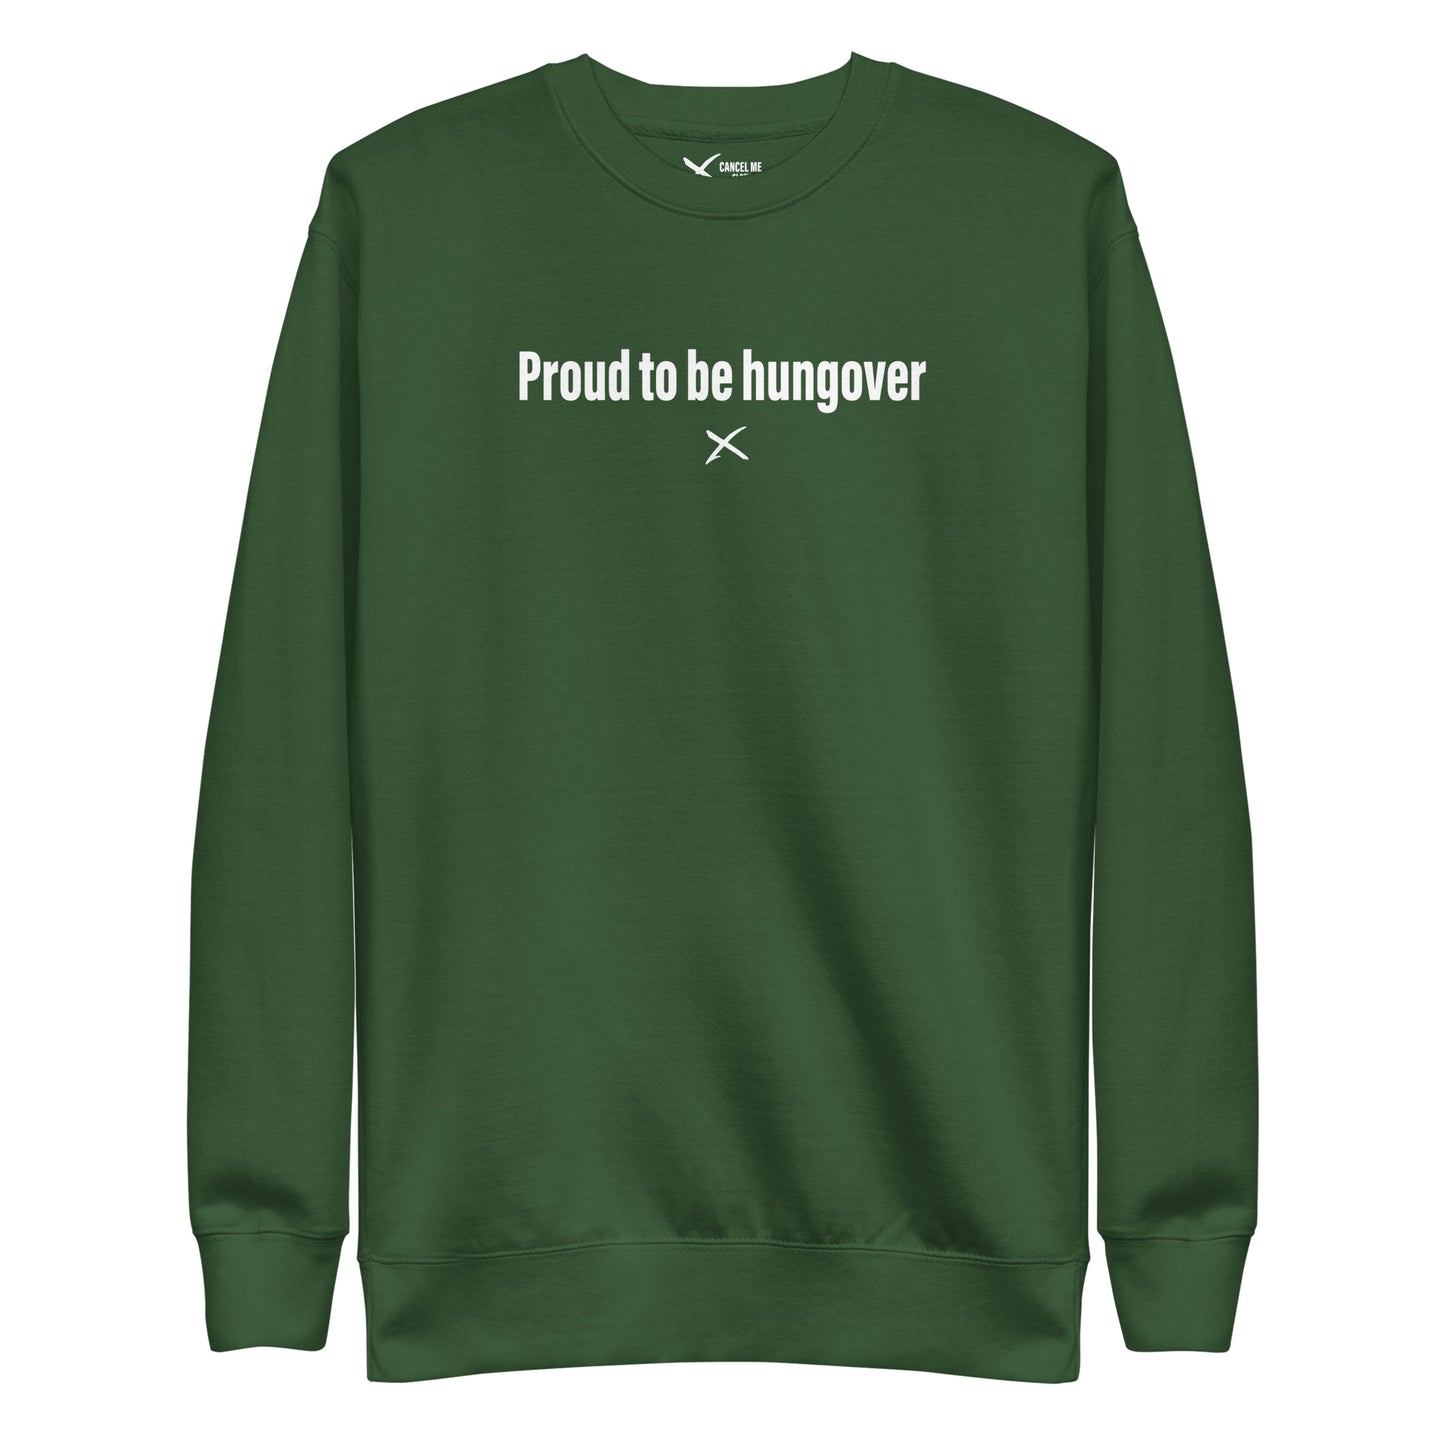 Proud to be hungover - Sweatshirt